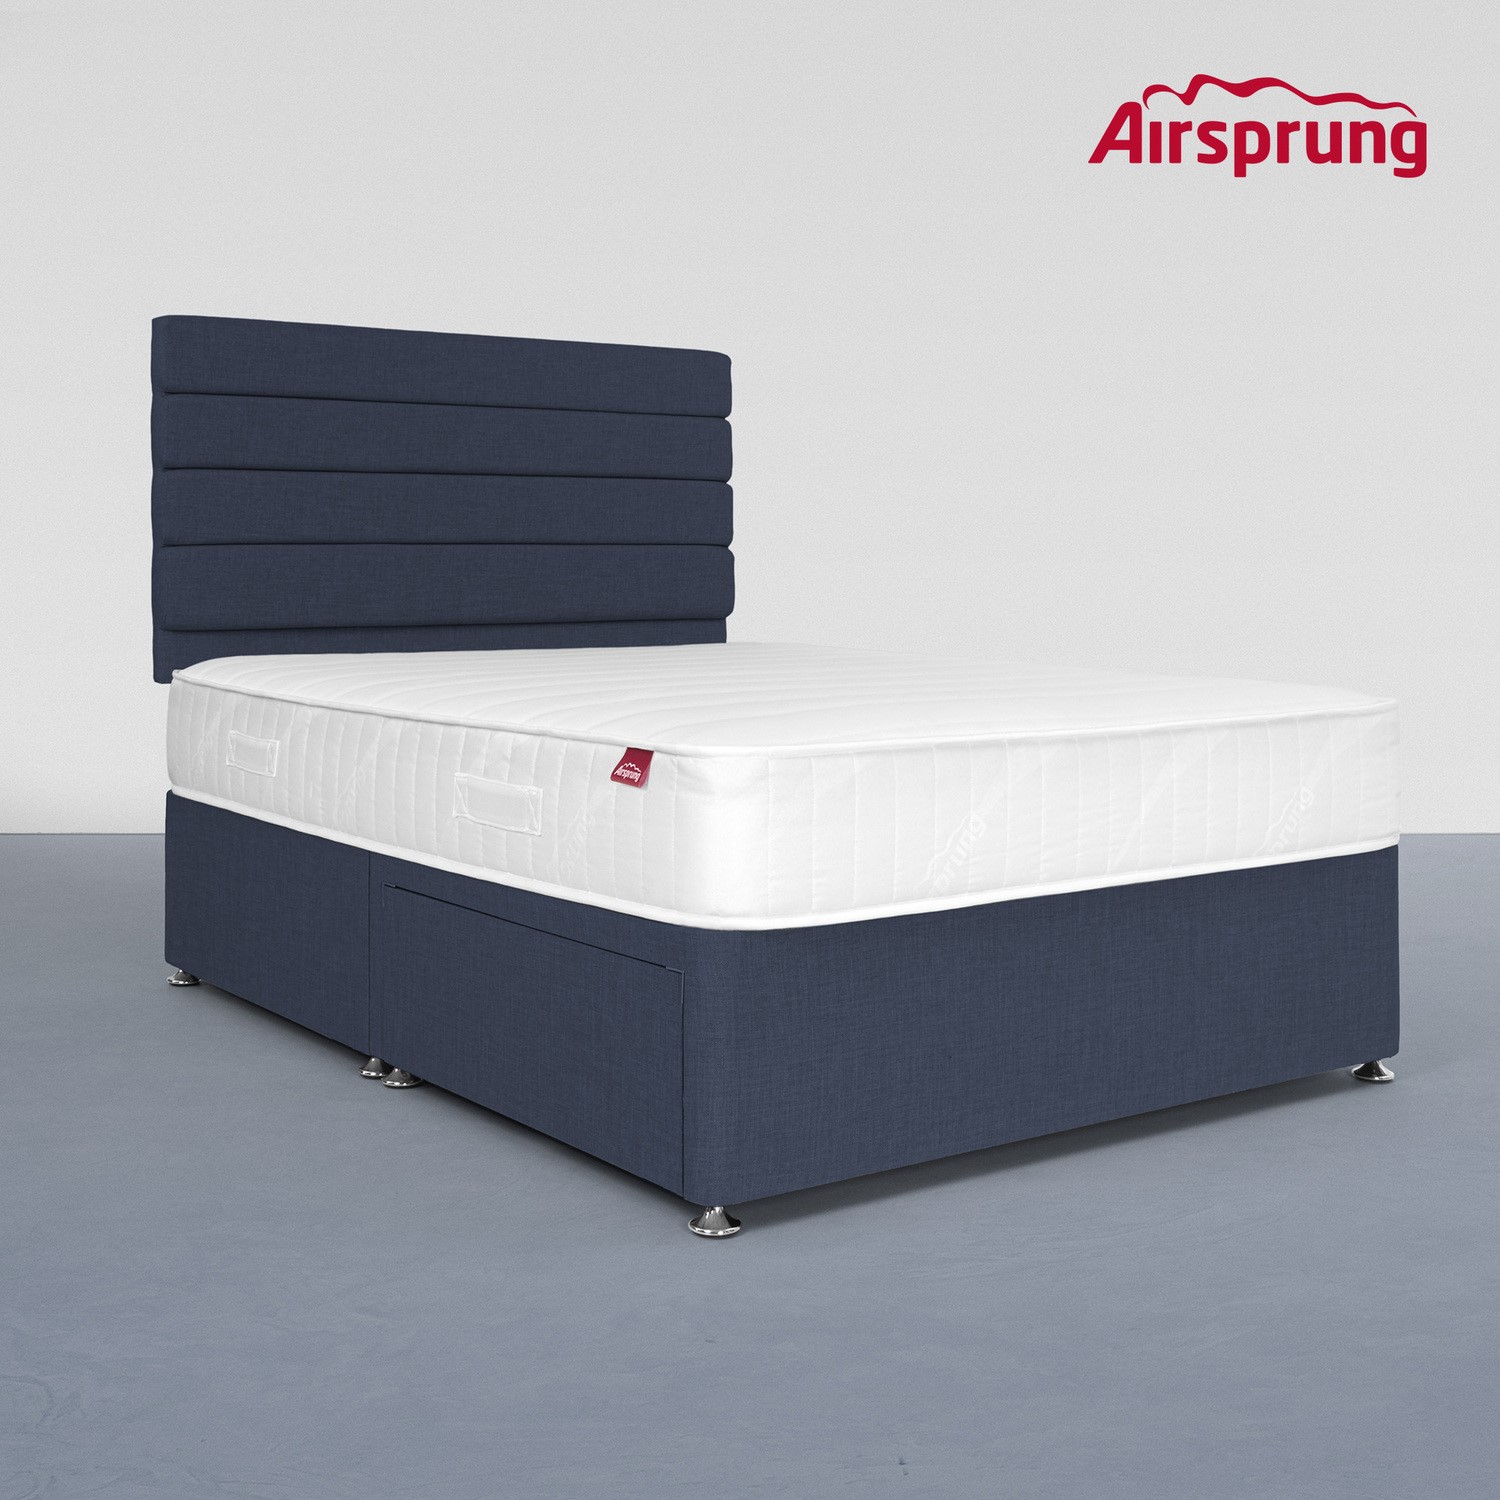 Photo of Airsprung small double 2 drawer divan bed with comfort mattress - midnight blue